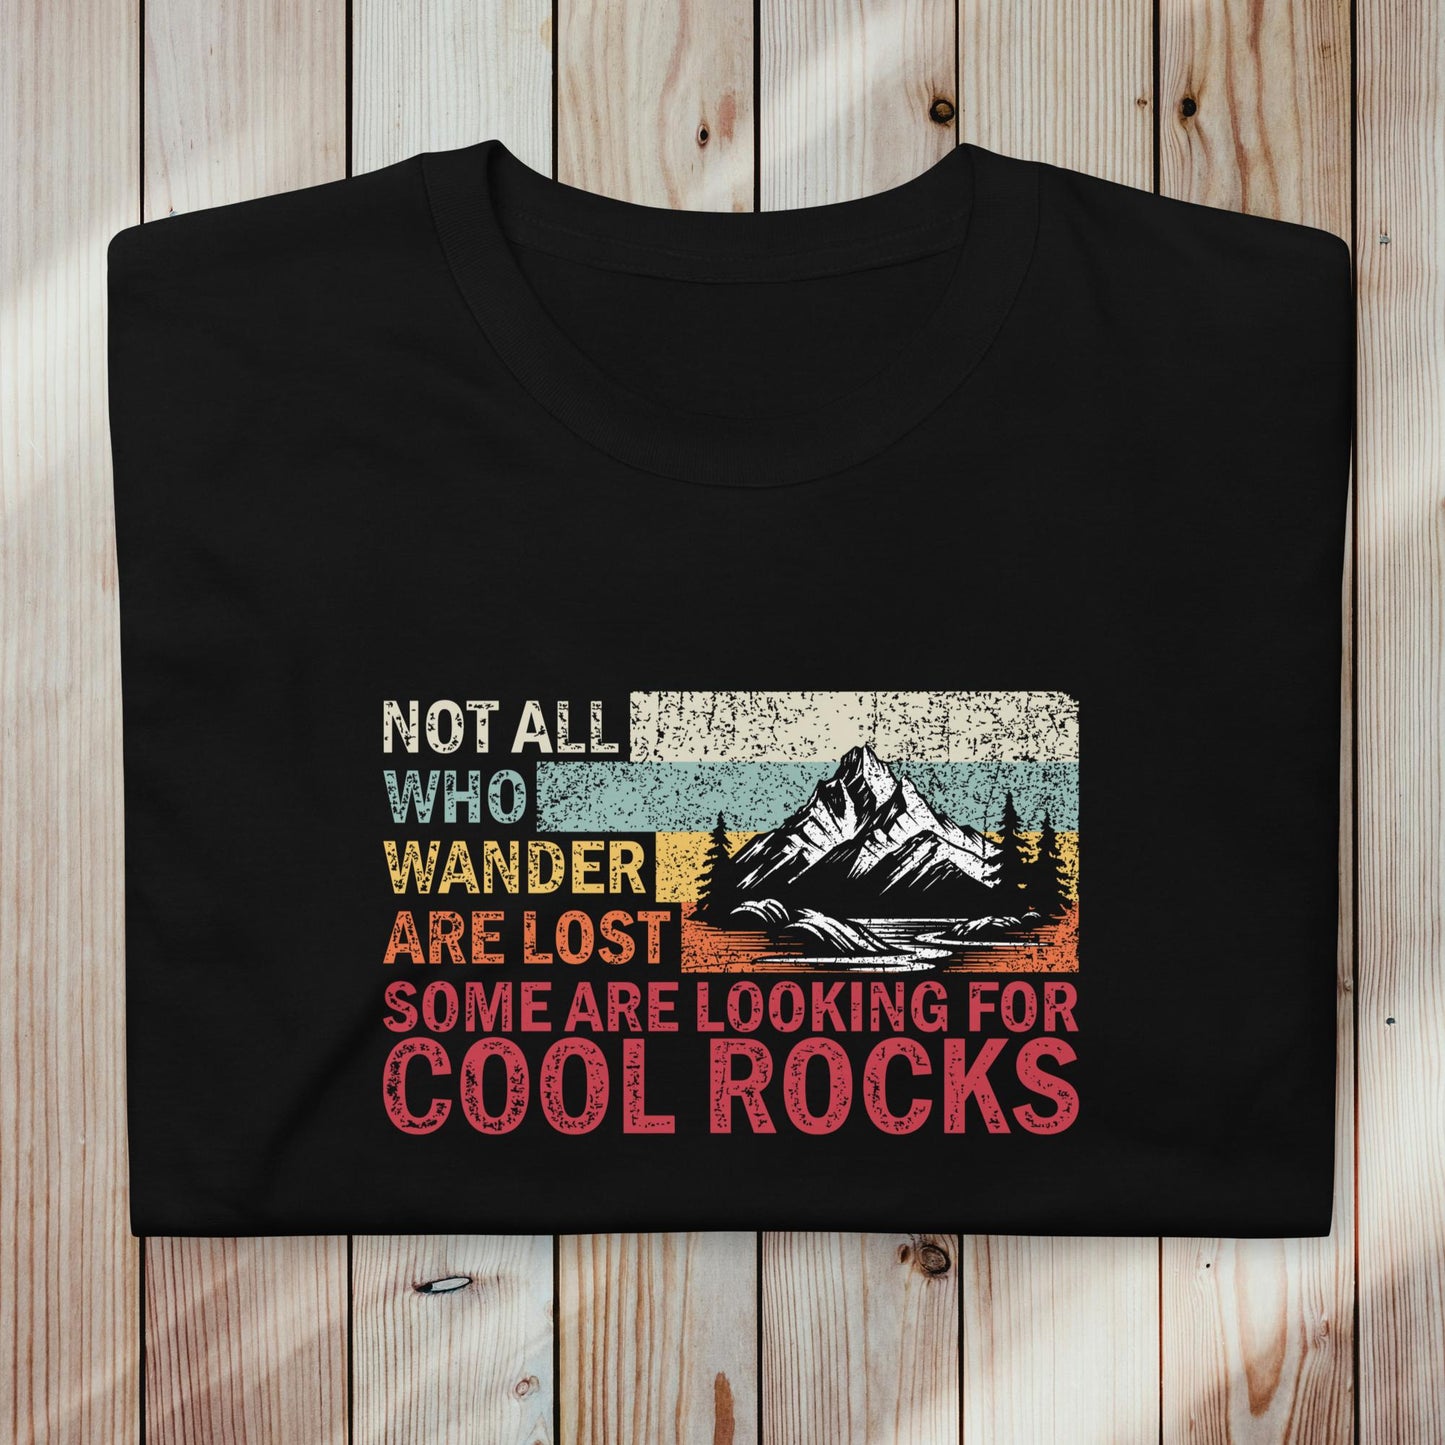 Unisex marškinėliai: "Not all who wander are lost, same are looking for cool rocks"